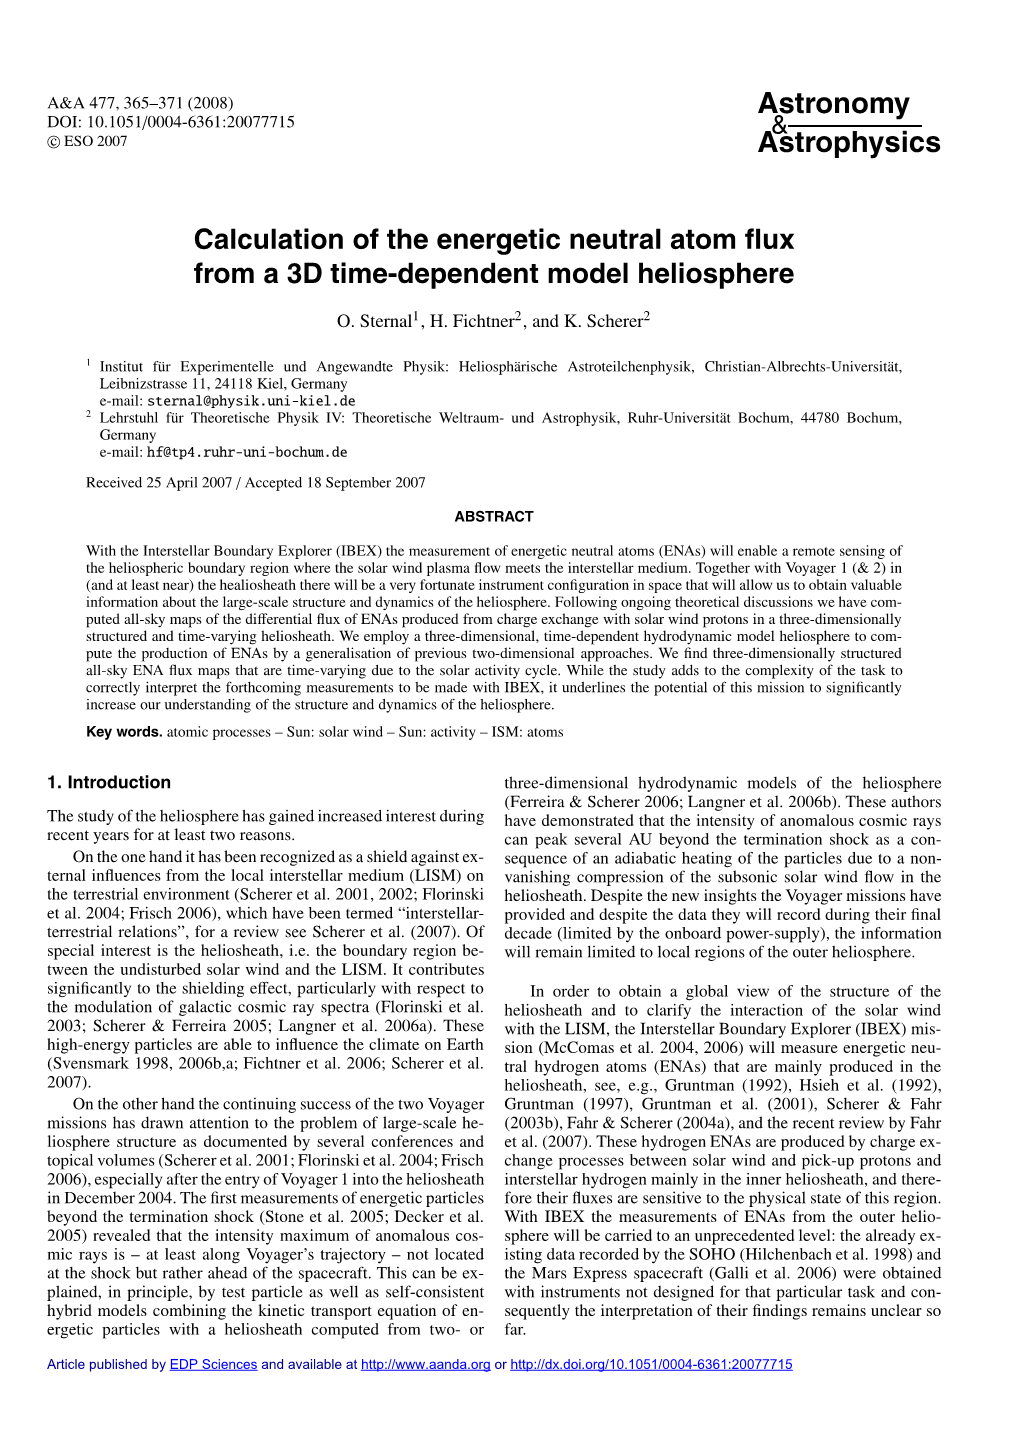 Calculation of the Energetic Neutral Atom Flux from a 3D Time-Dependent Model Heliosphere